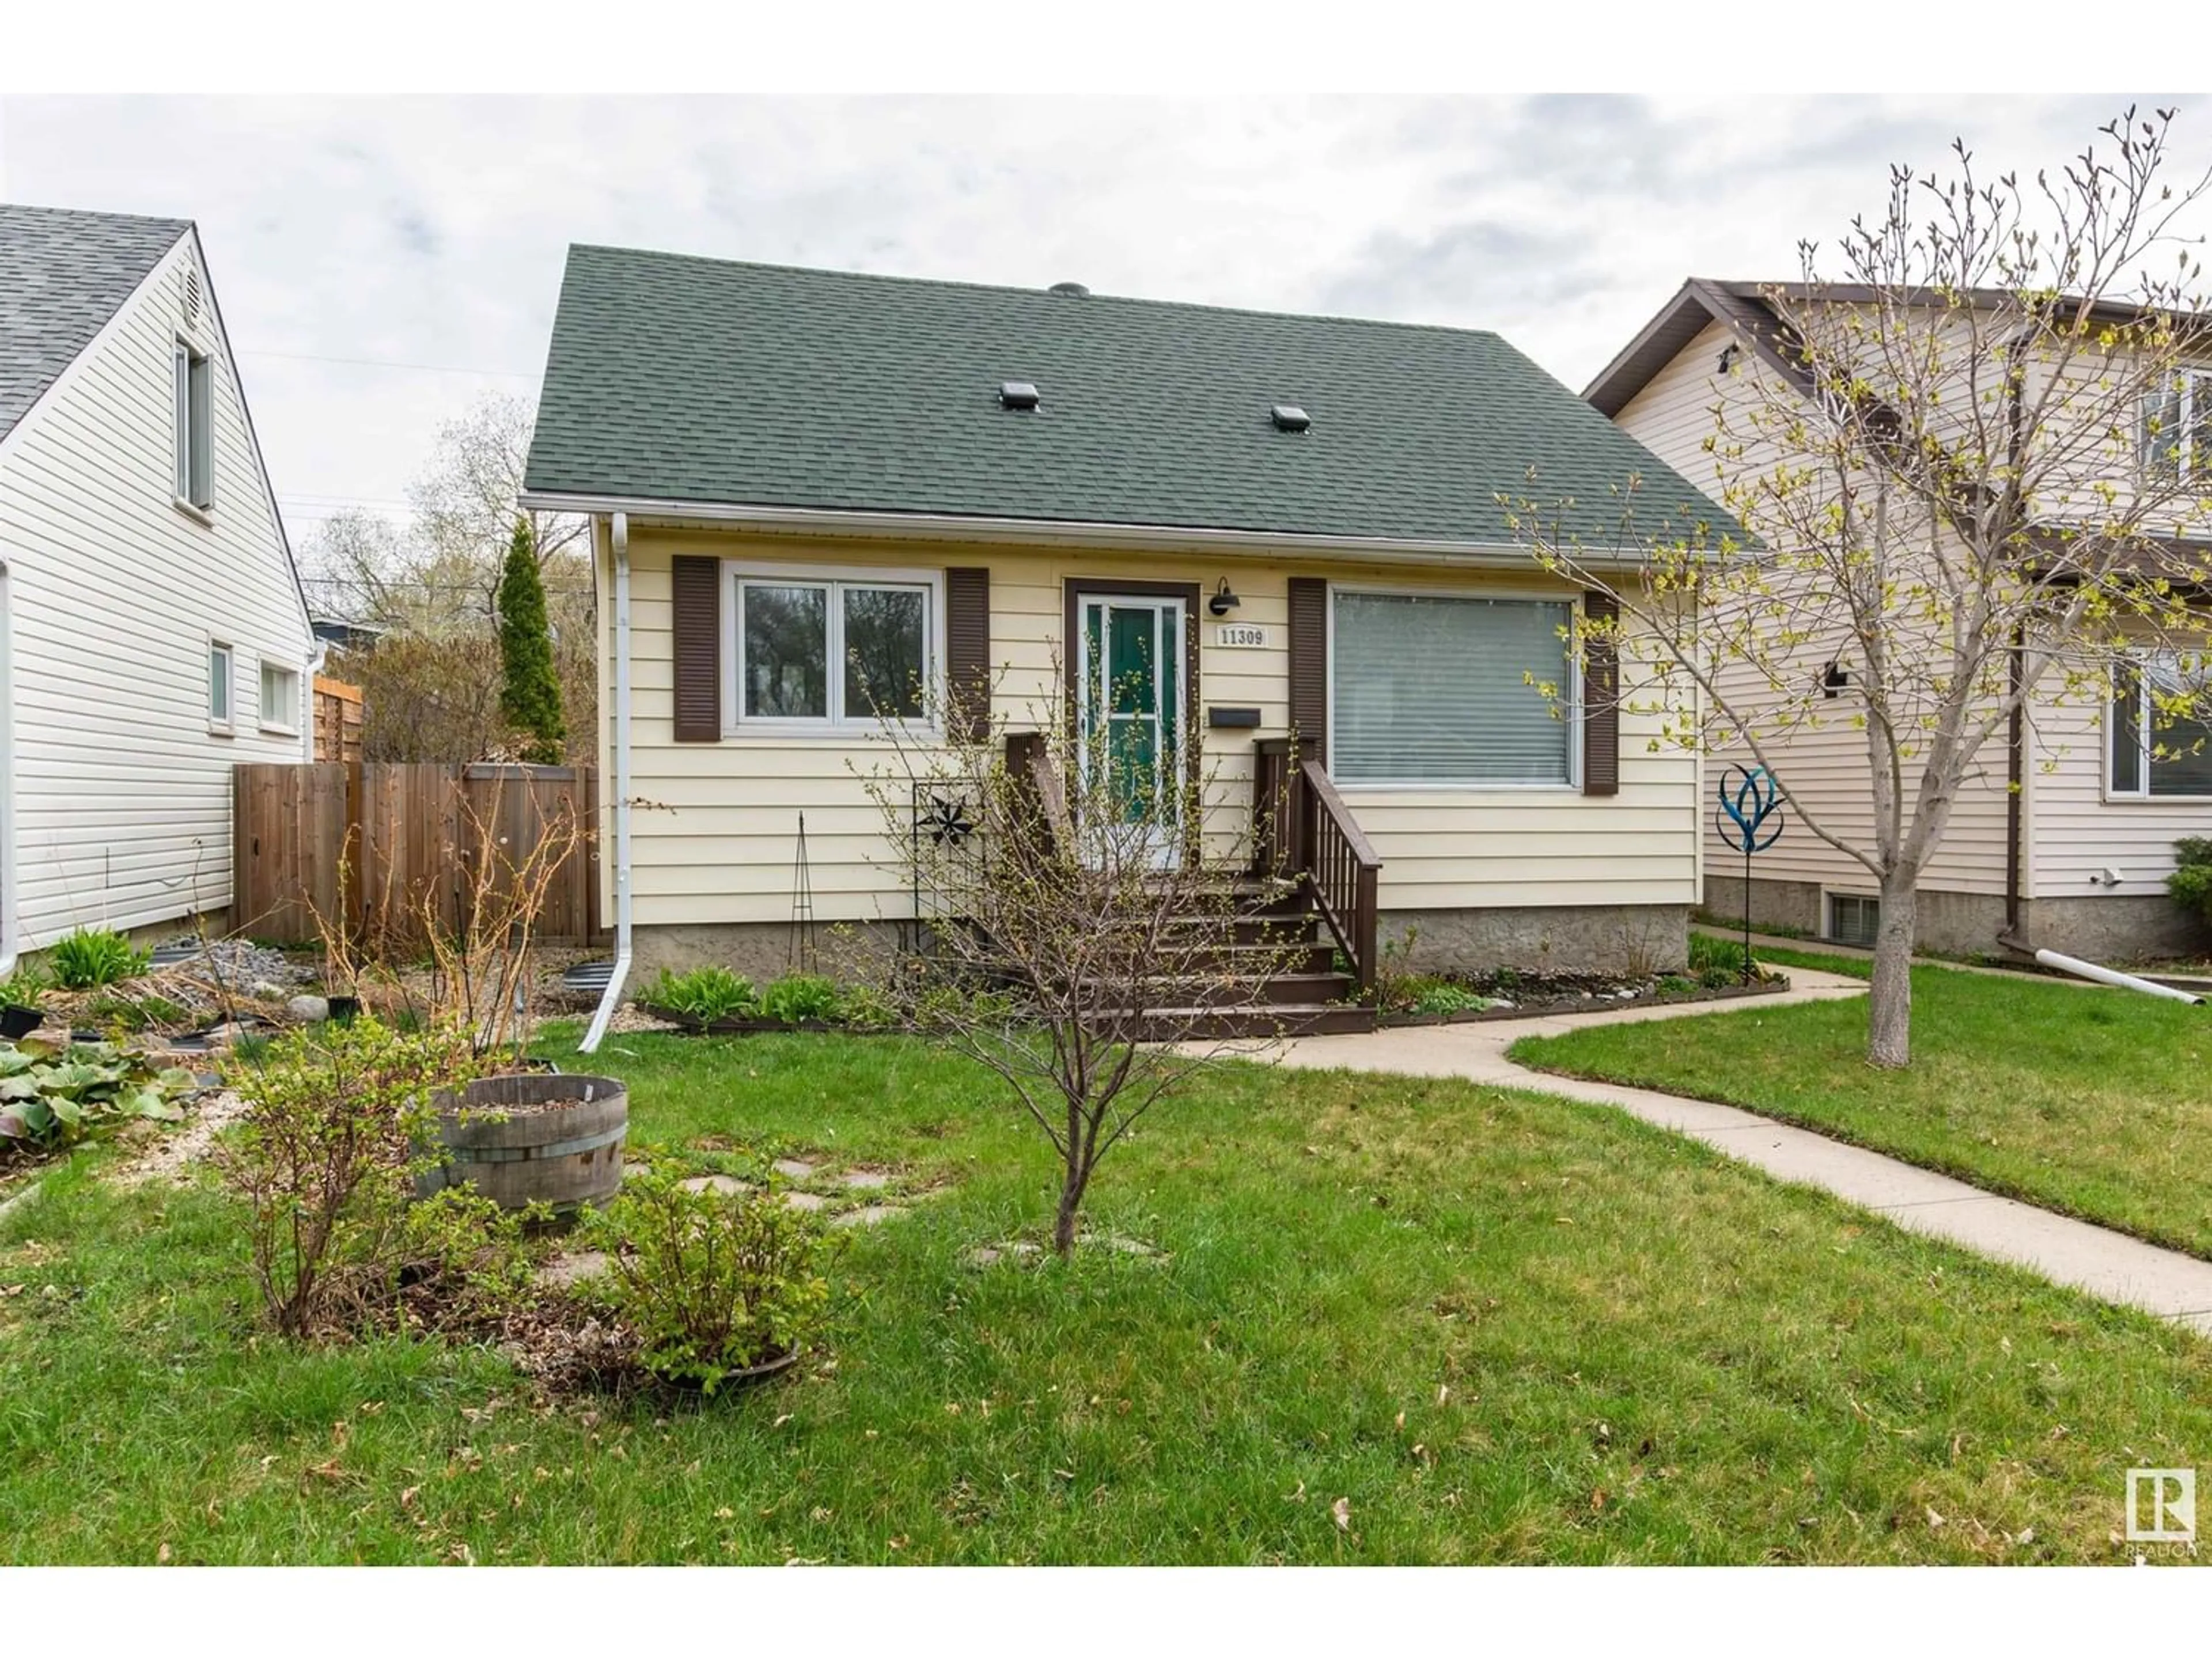 Frontside or backside of a home for 11309 69 ST NW, Edmonton Alberta T5B1R8